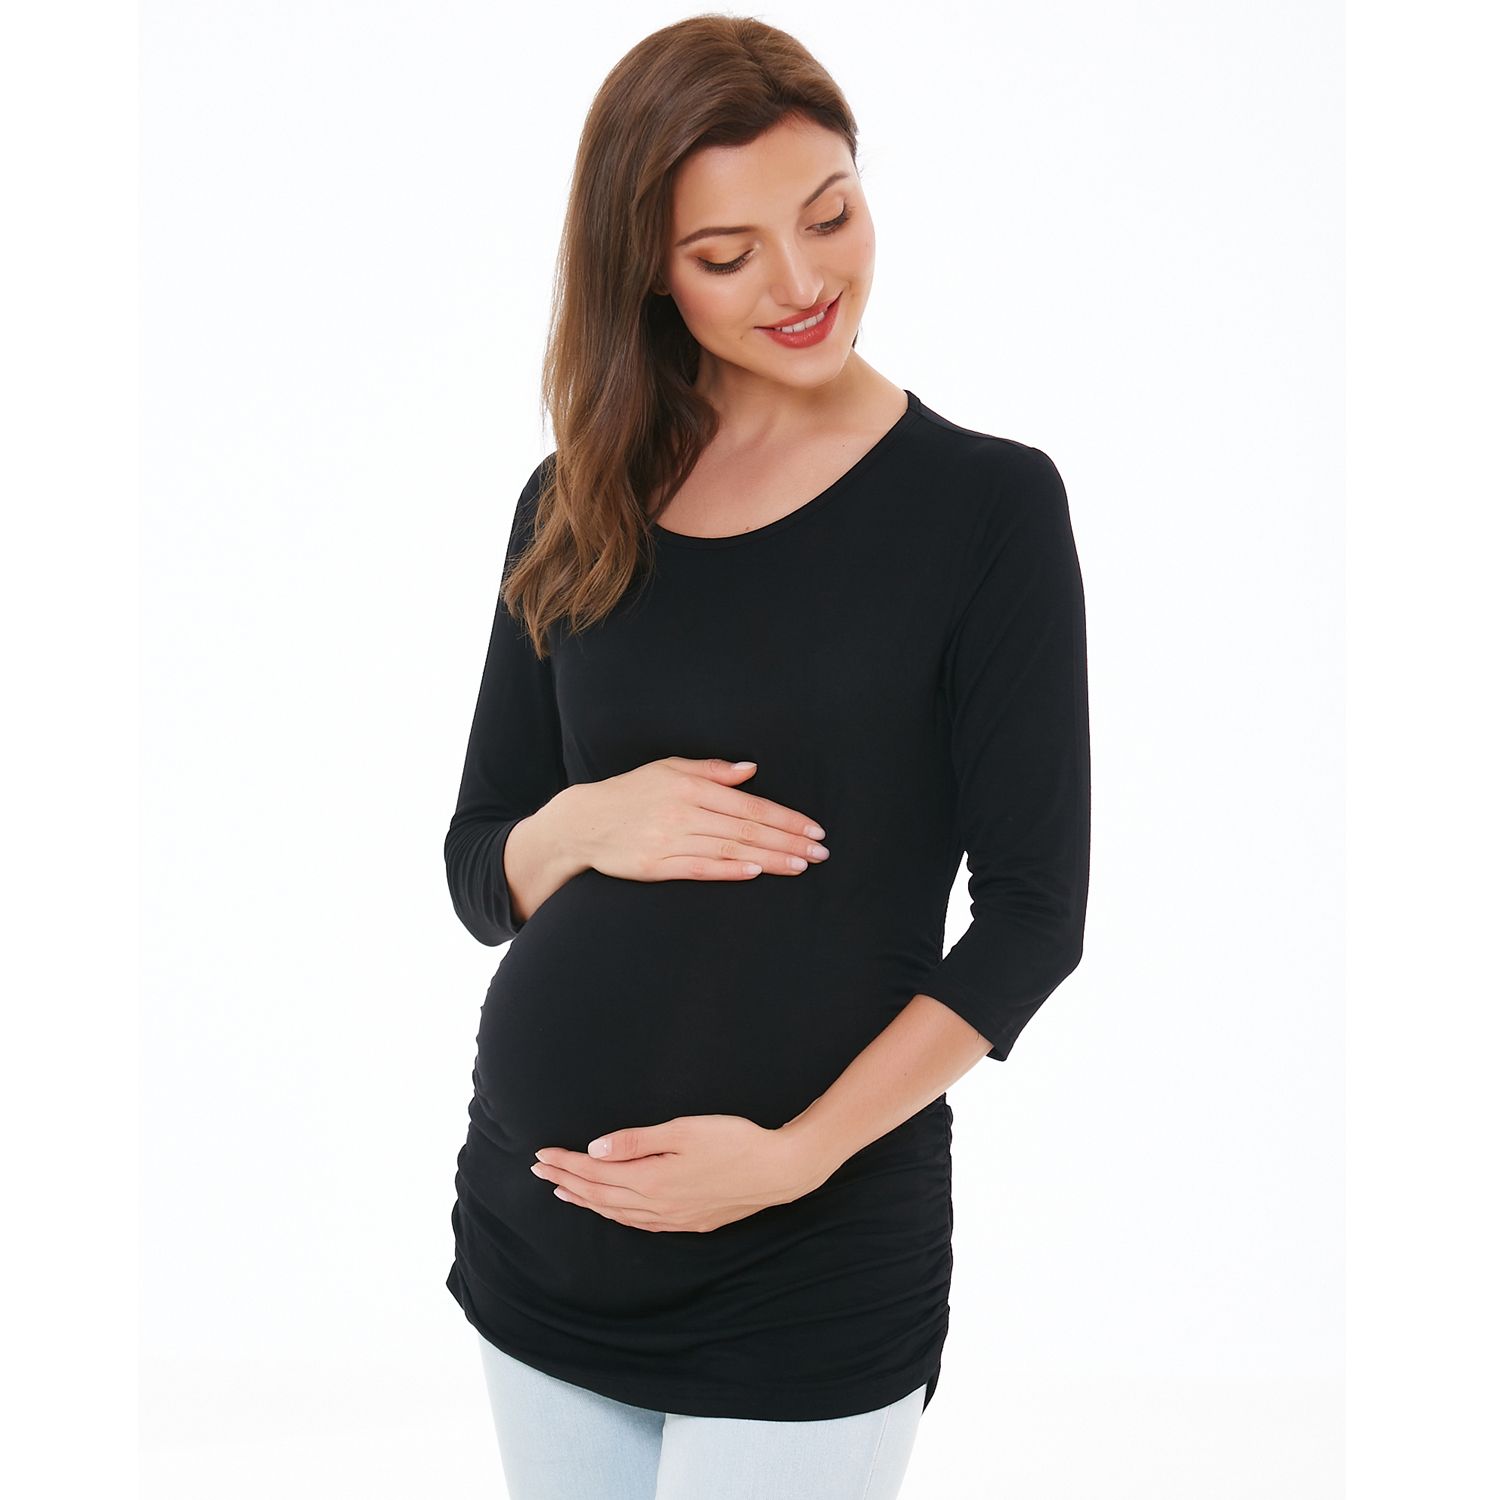 Smallshow Women's Maternity Tops 3/4 Sleeve Tunic Pregnancy Clothes Shirt 3-Pack 